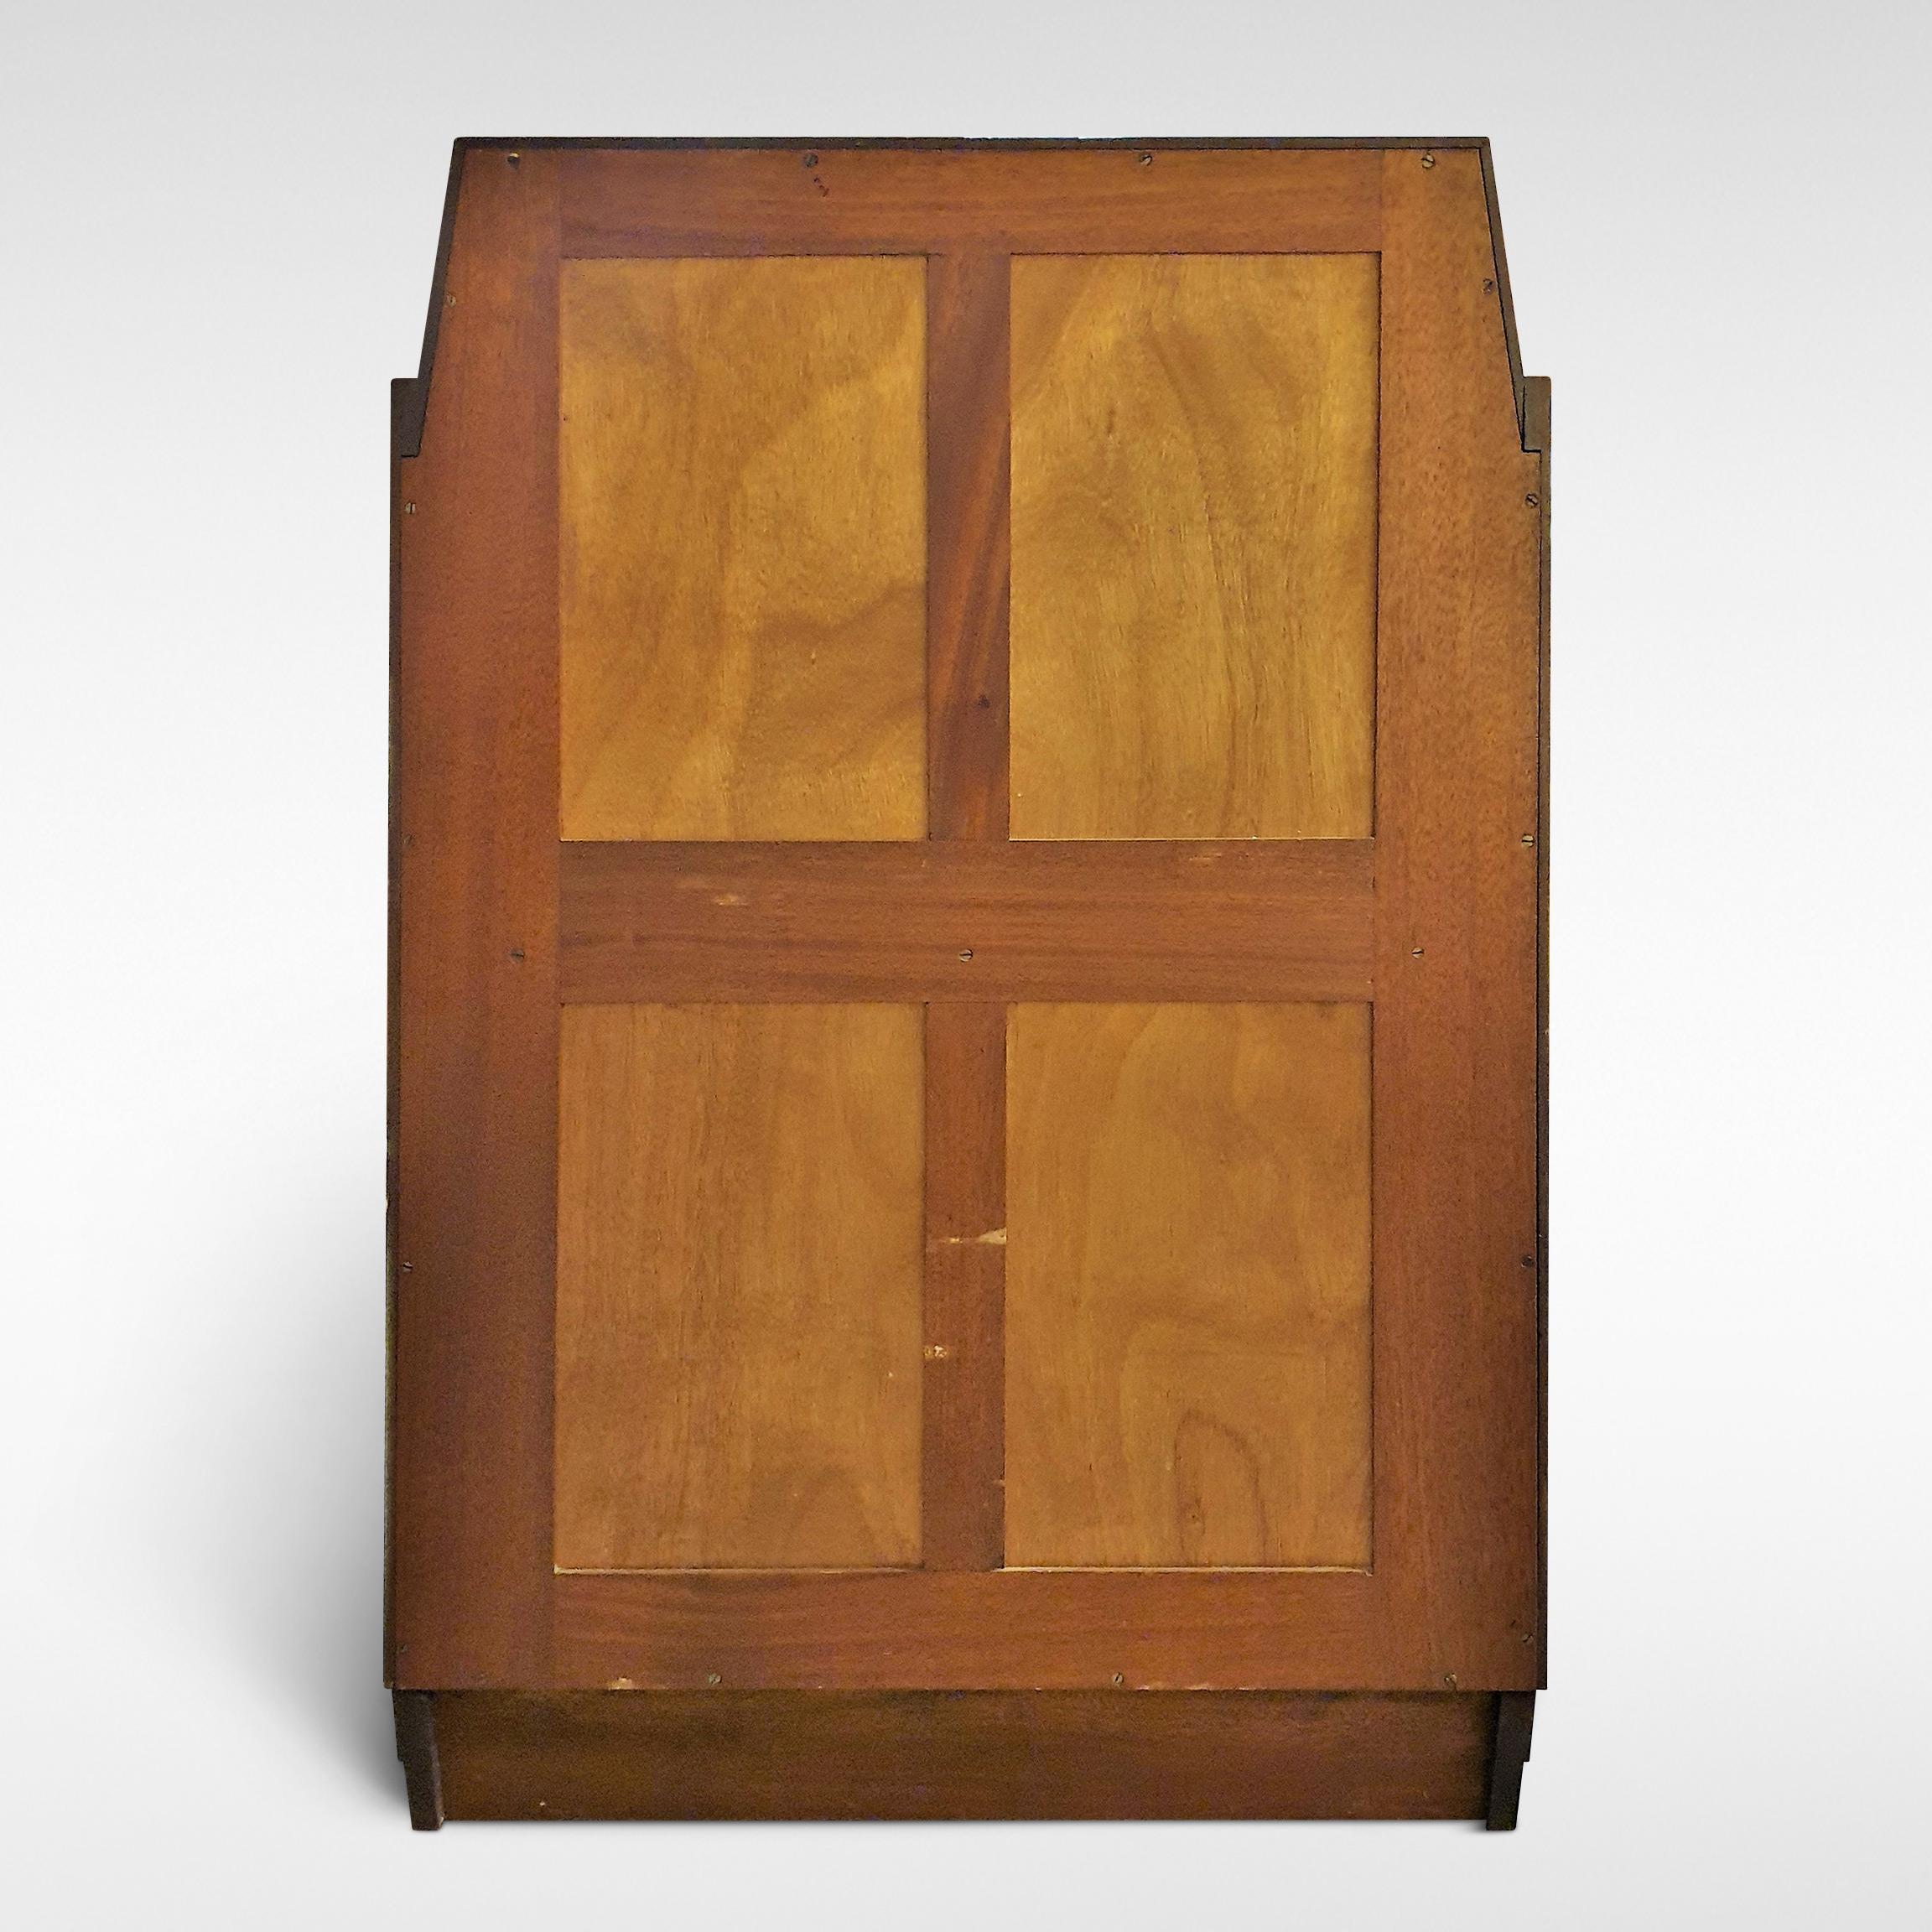 20th Century Art Deco Cabinet with Drawers Attributed to Sir Ambrose Heal